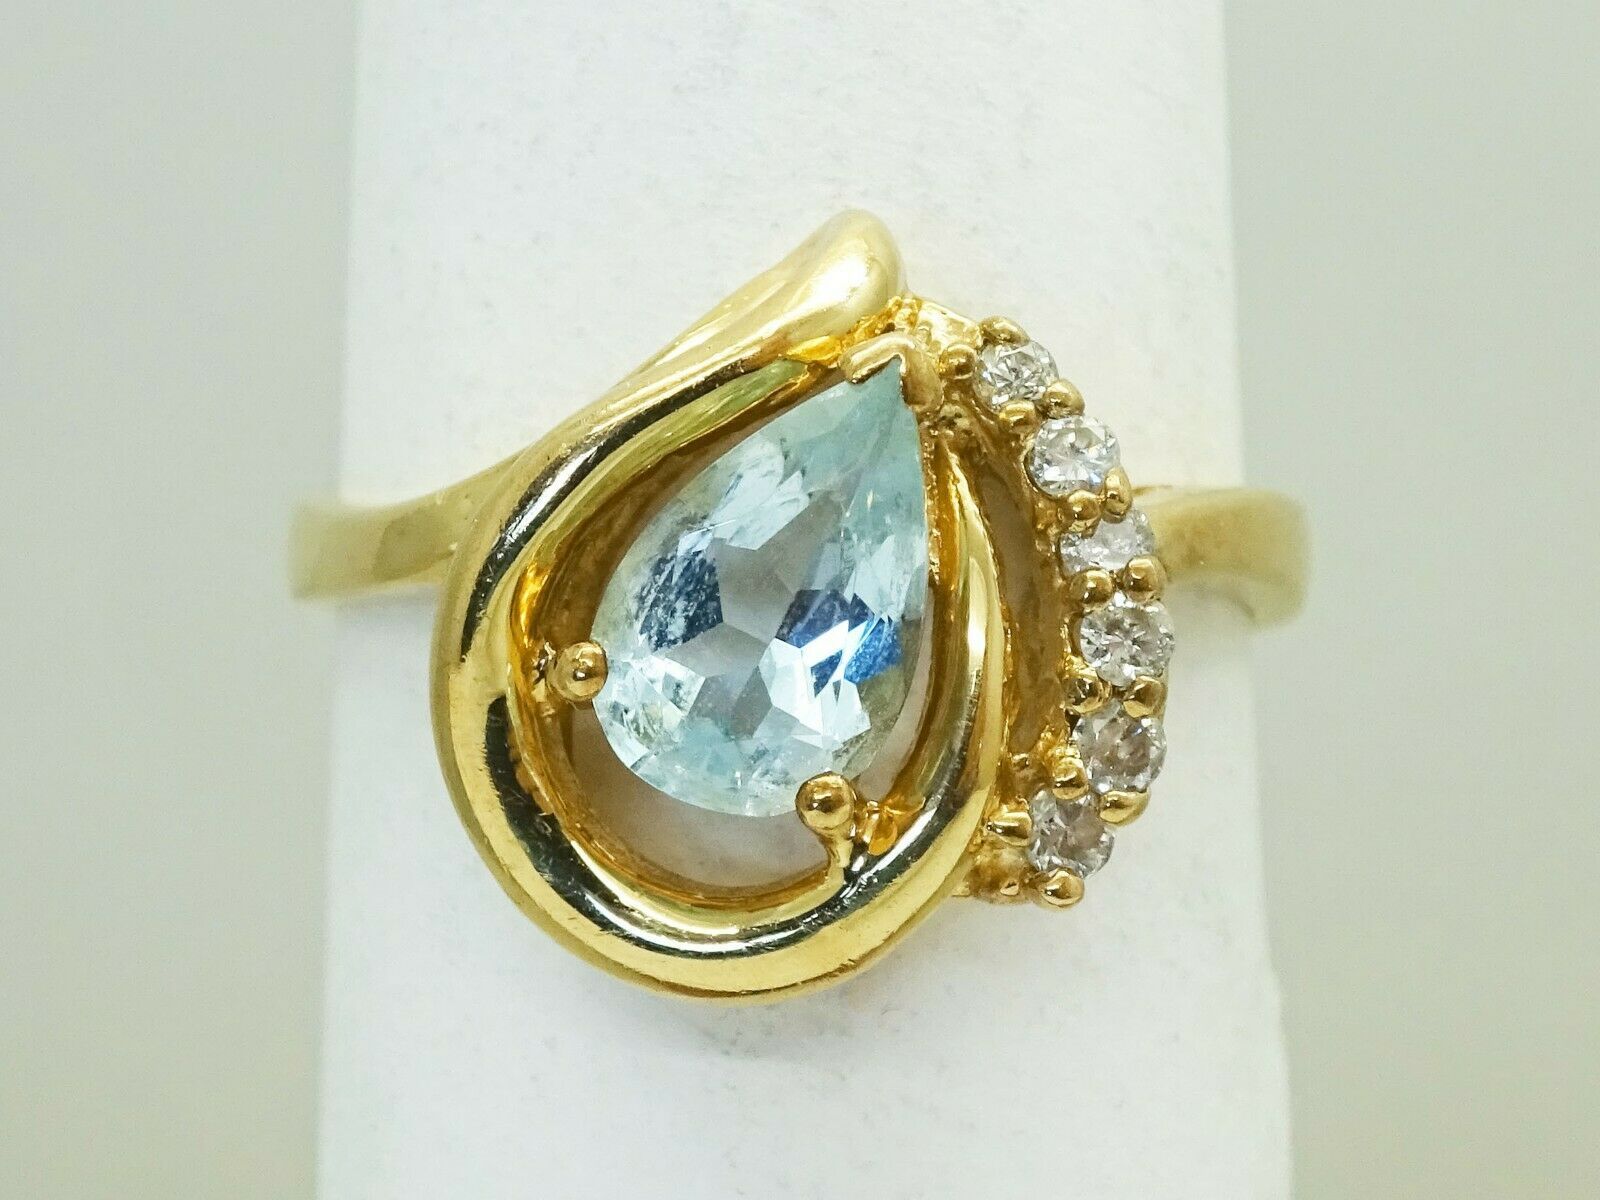 Primary image for 0.50ct tw Natural Pear Aquamarine & Diamond Accent Ring 14k Gold Size 6